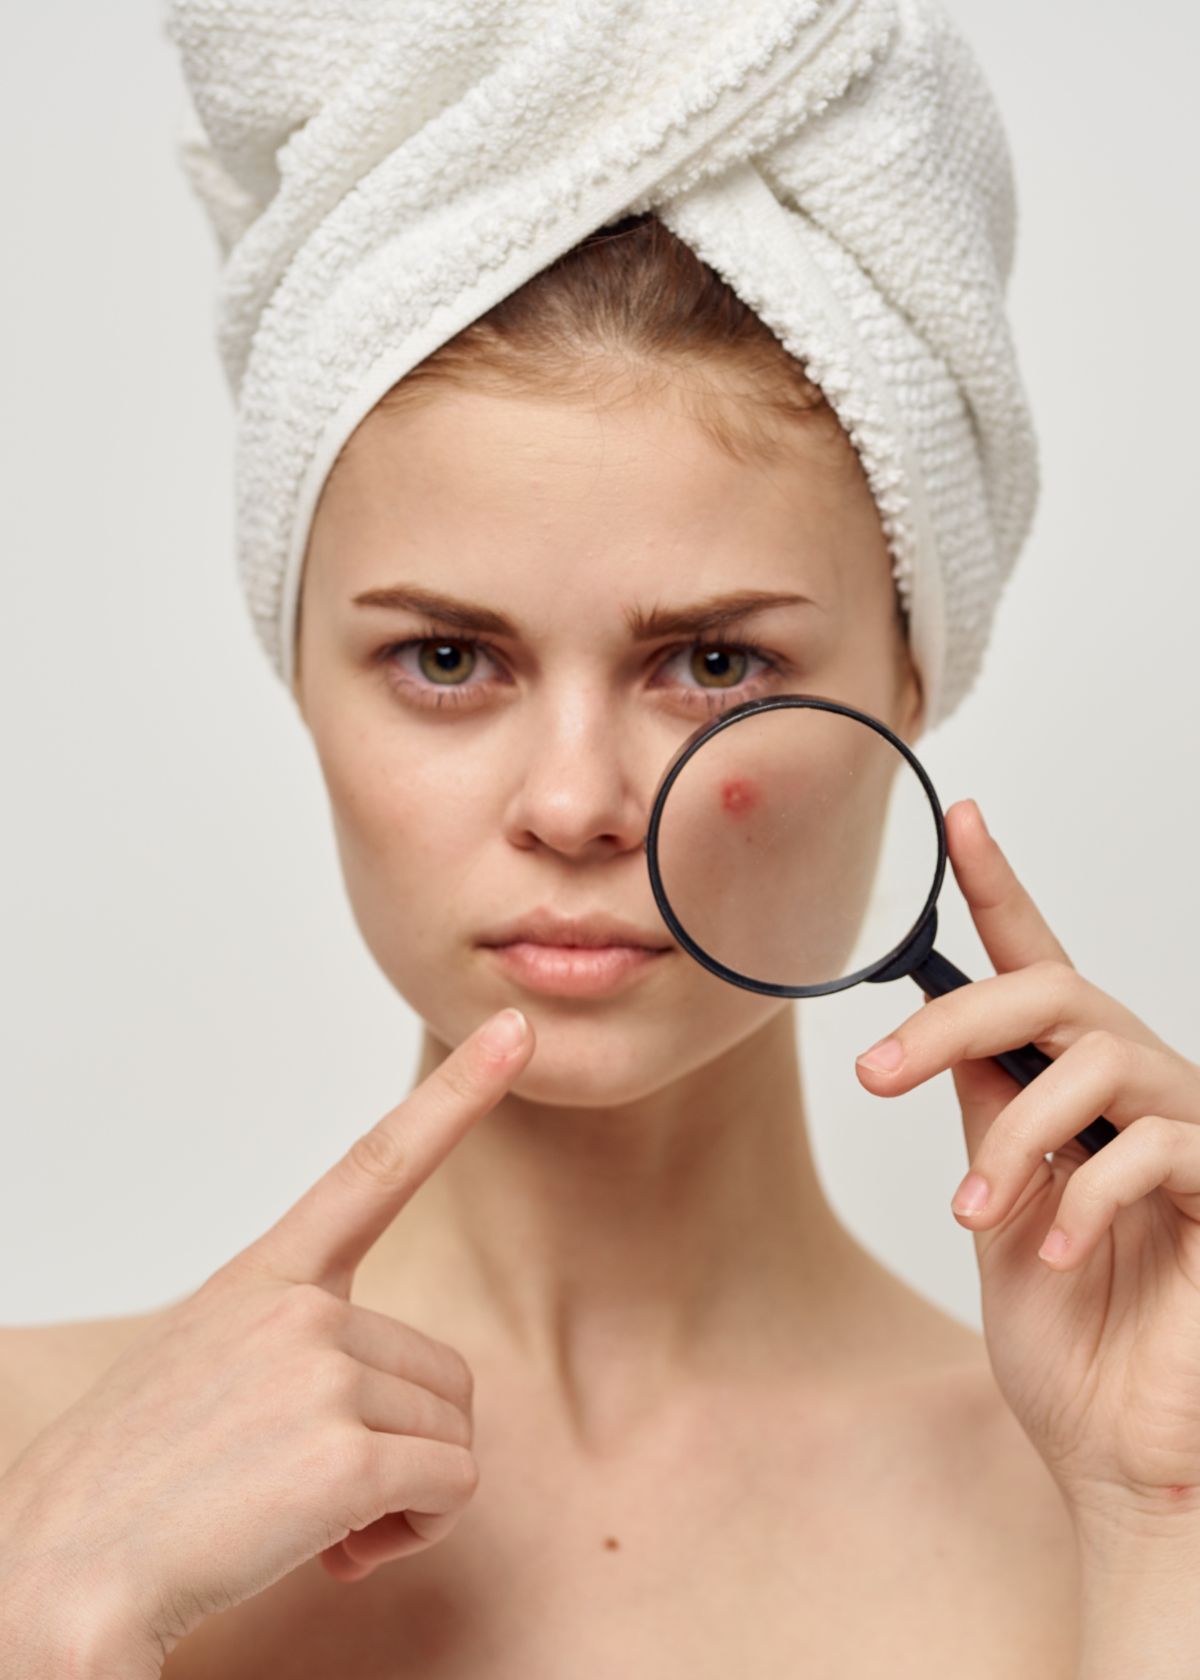 Does Hyaluronic Acid Help Acne Scars?